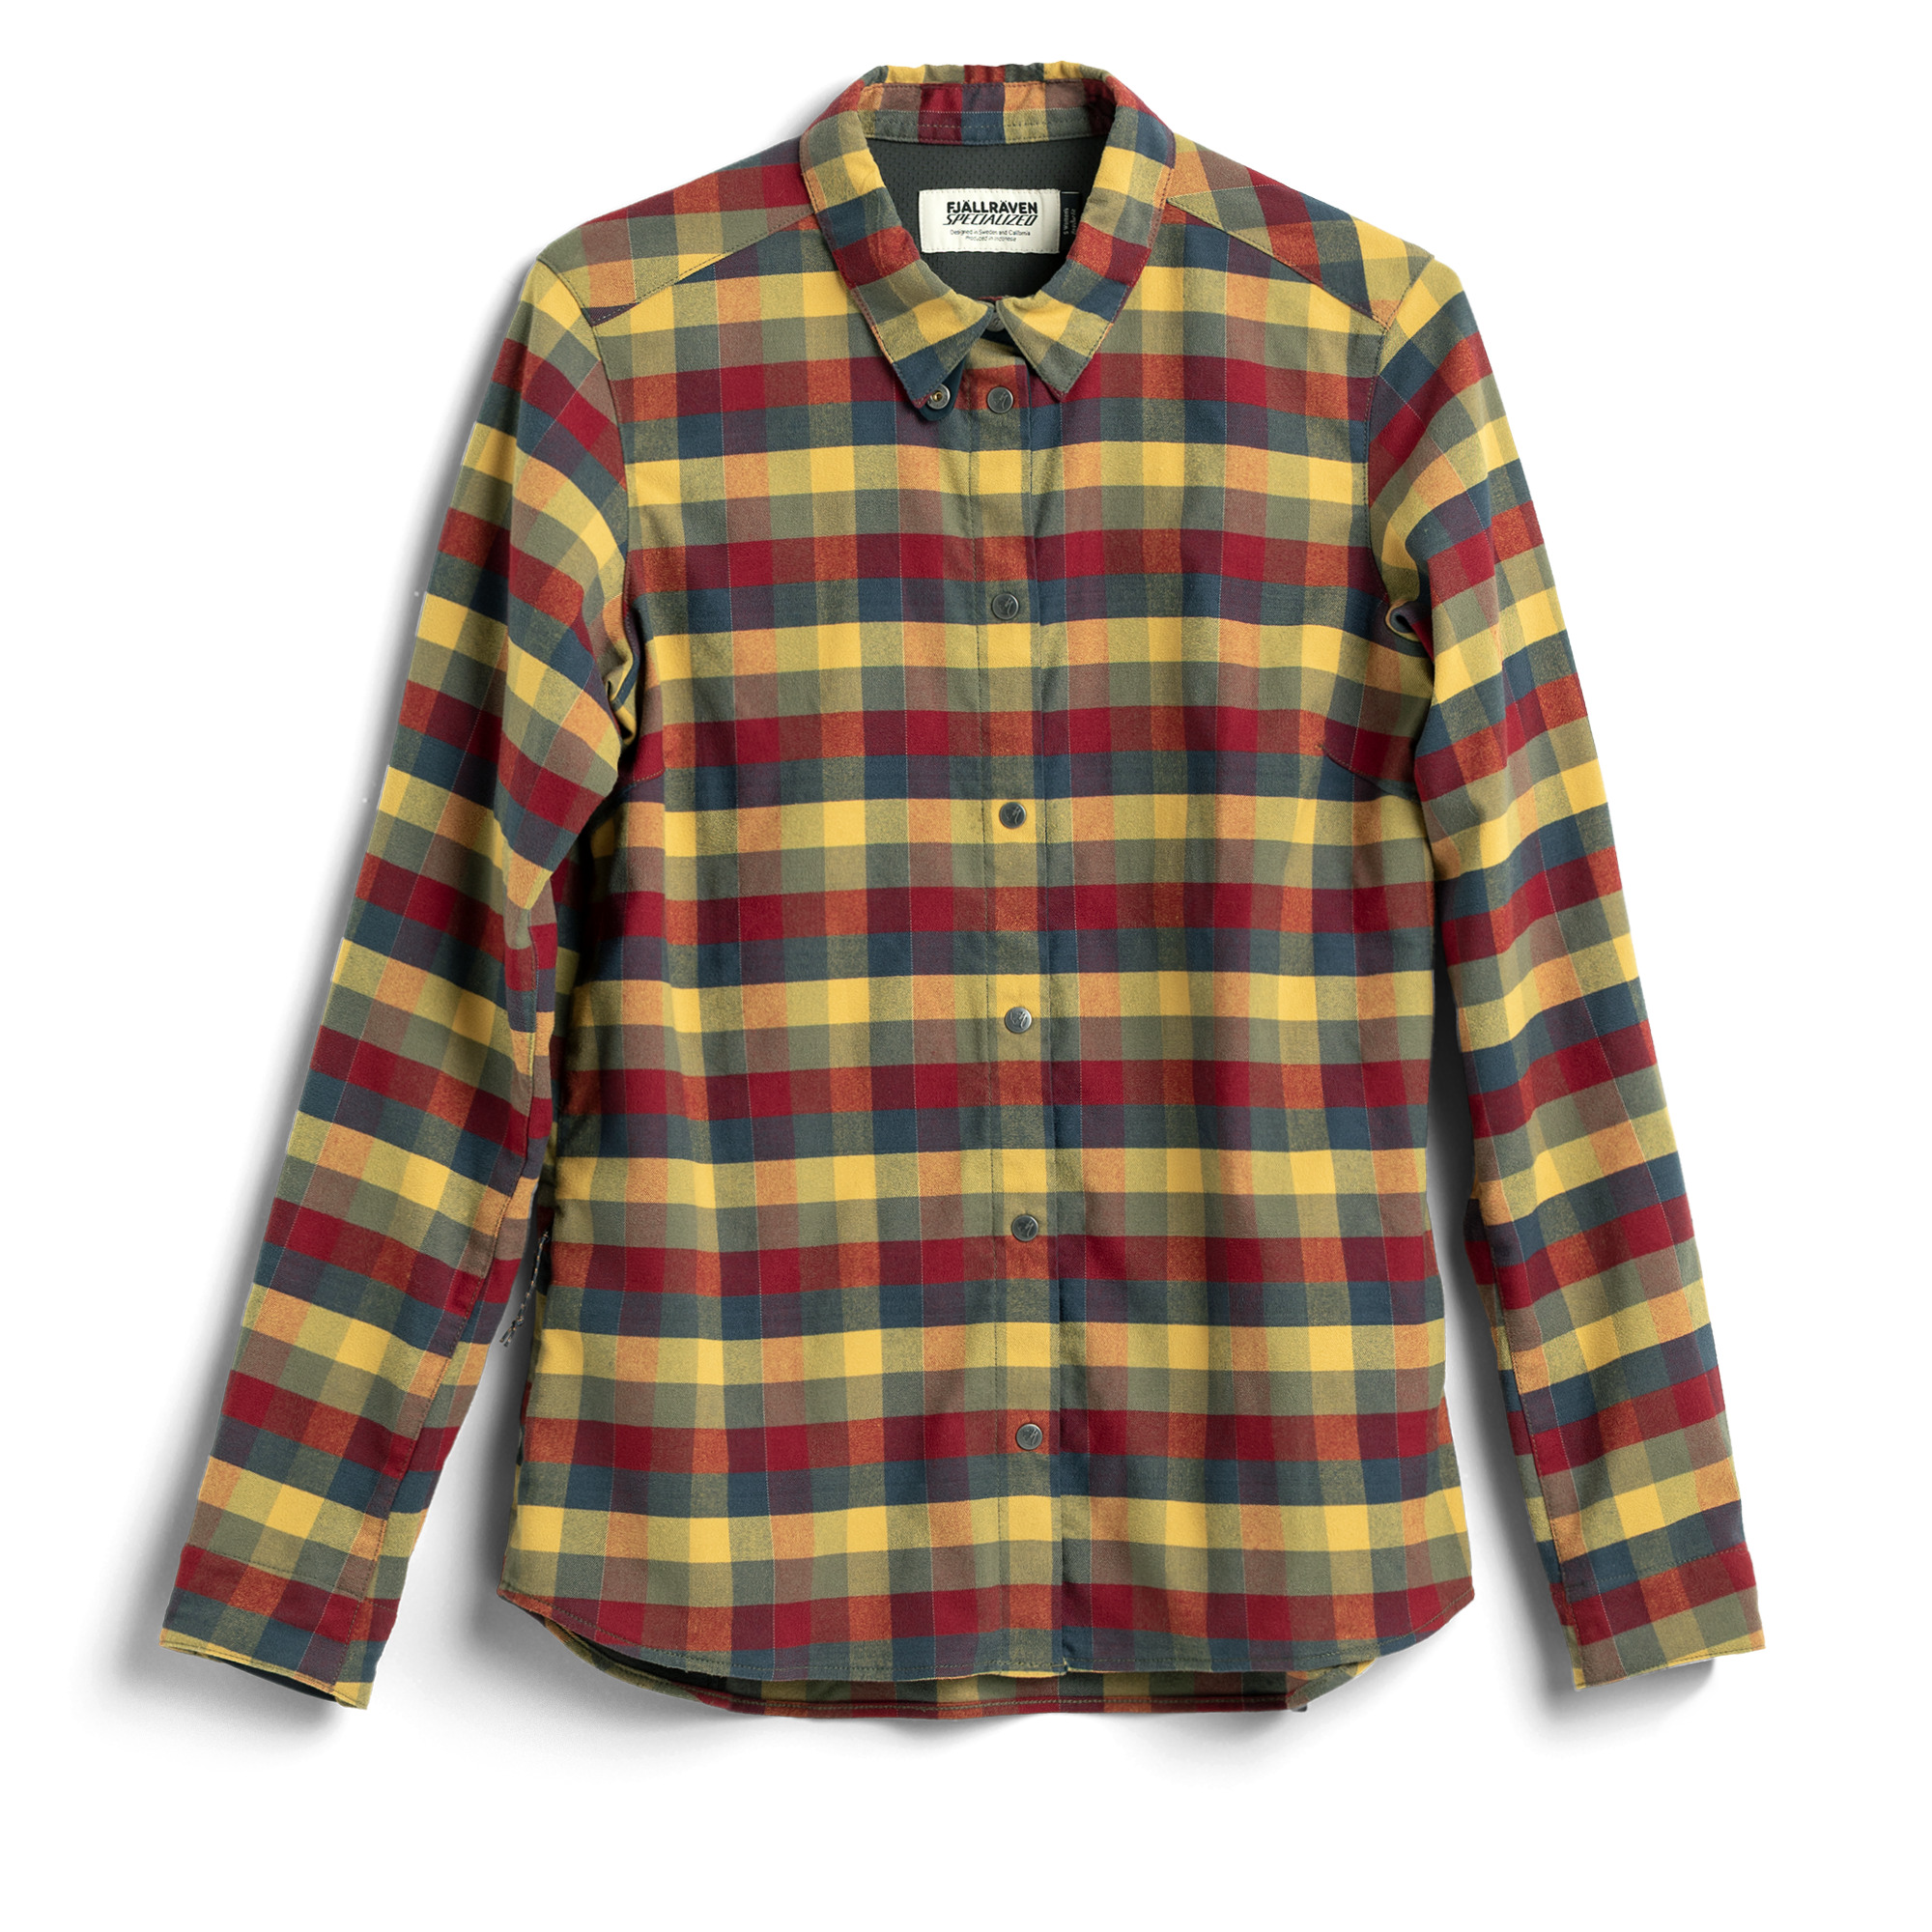 Shop Women's Shirts and Flannel Online | Fjallraven US